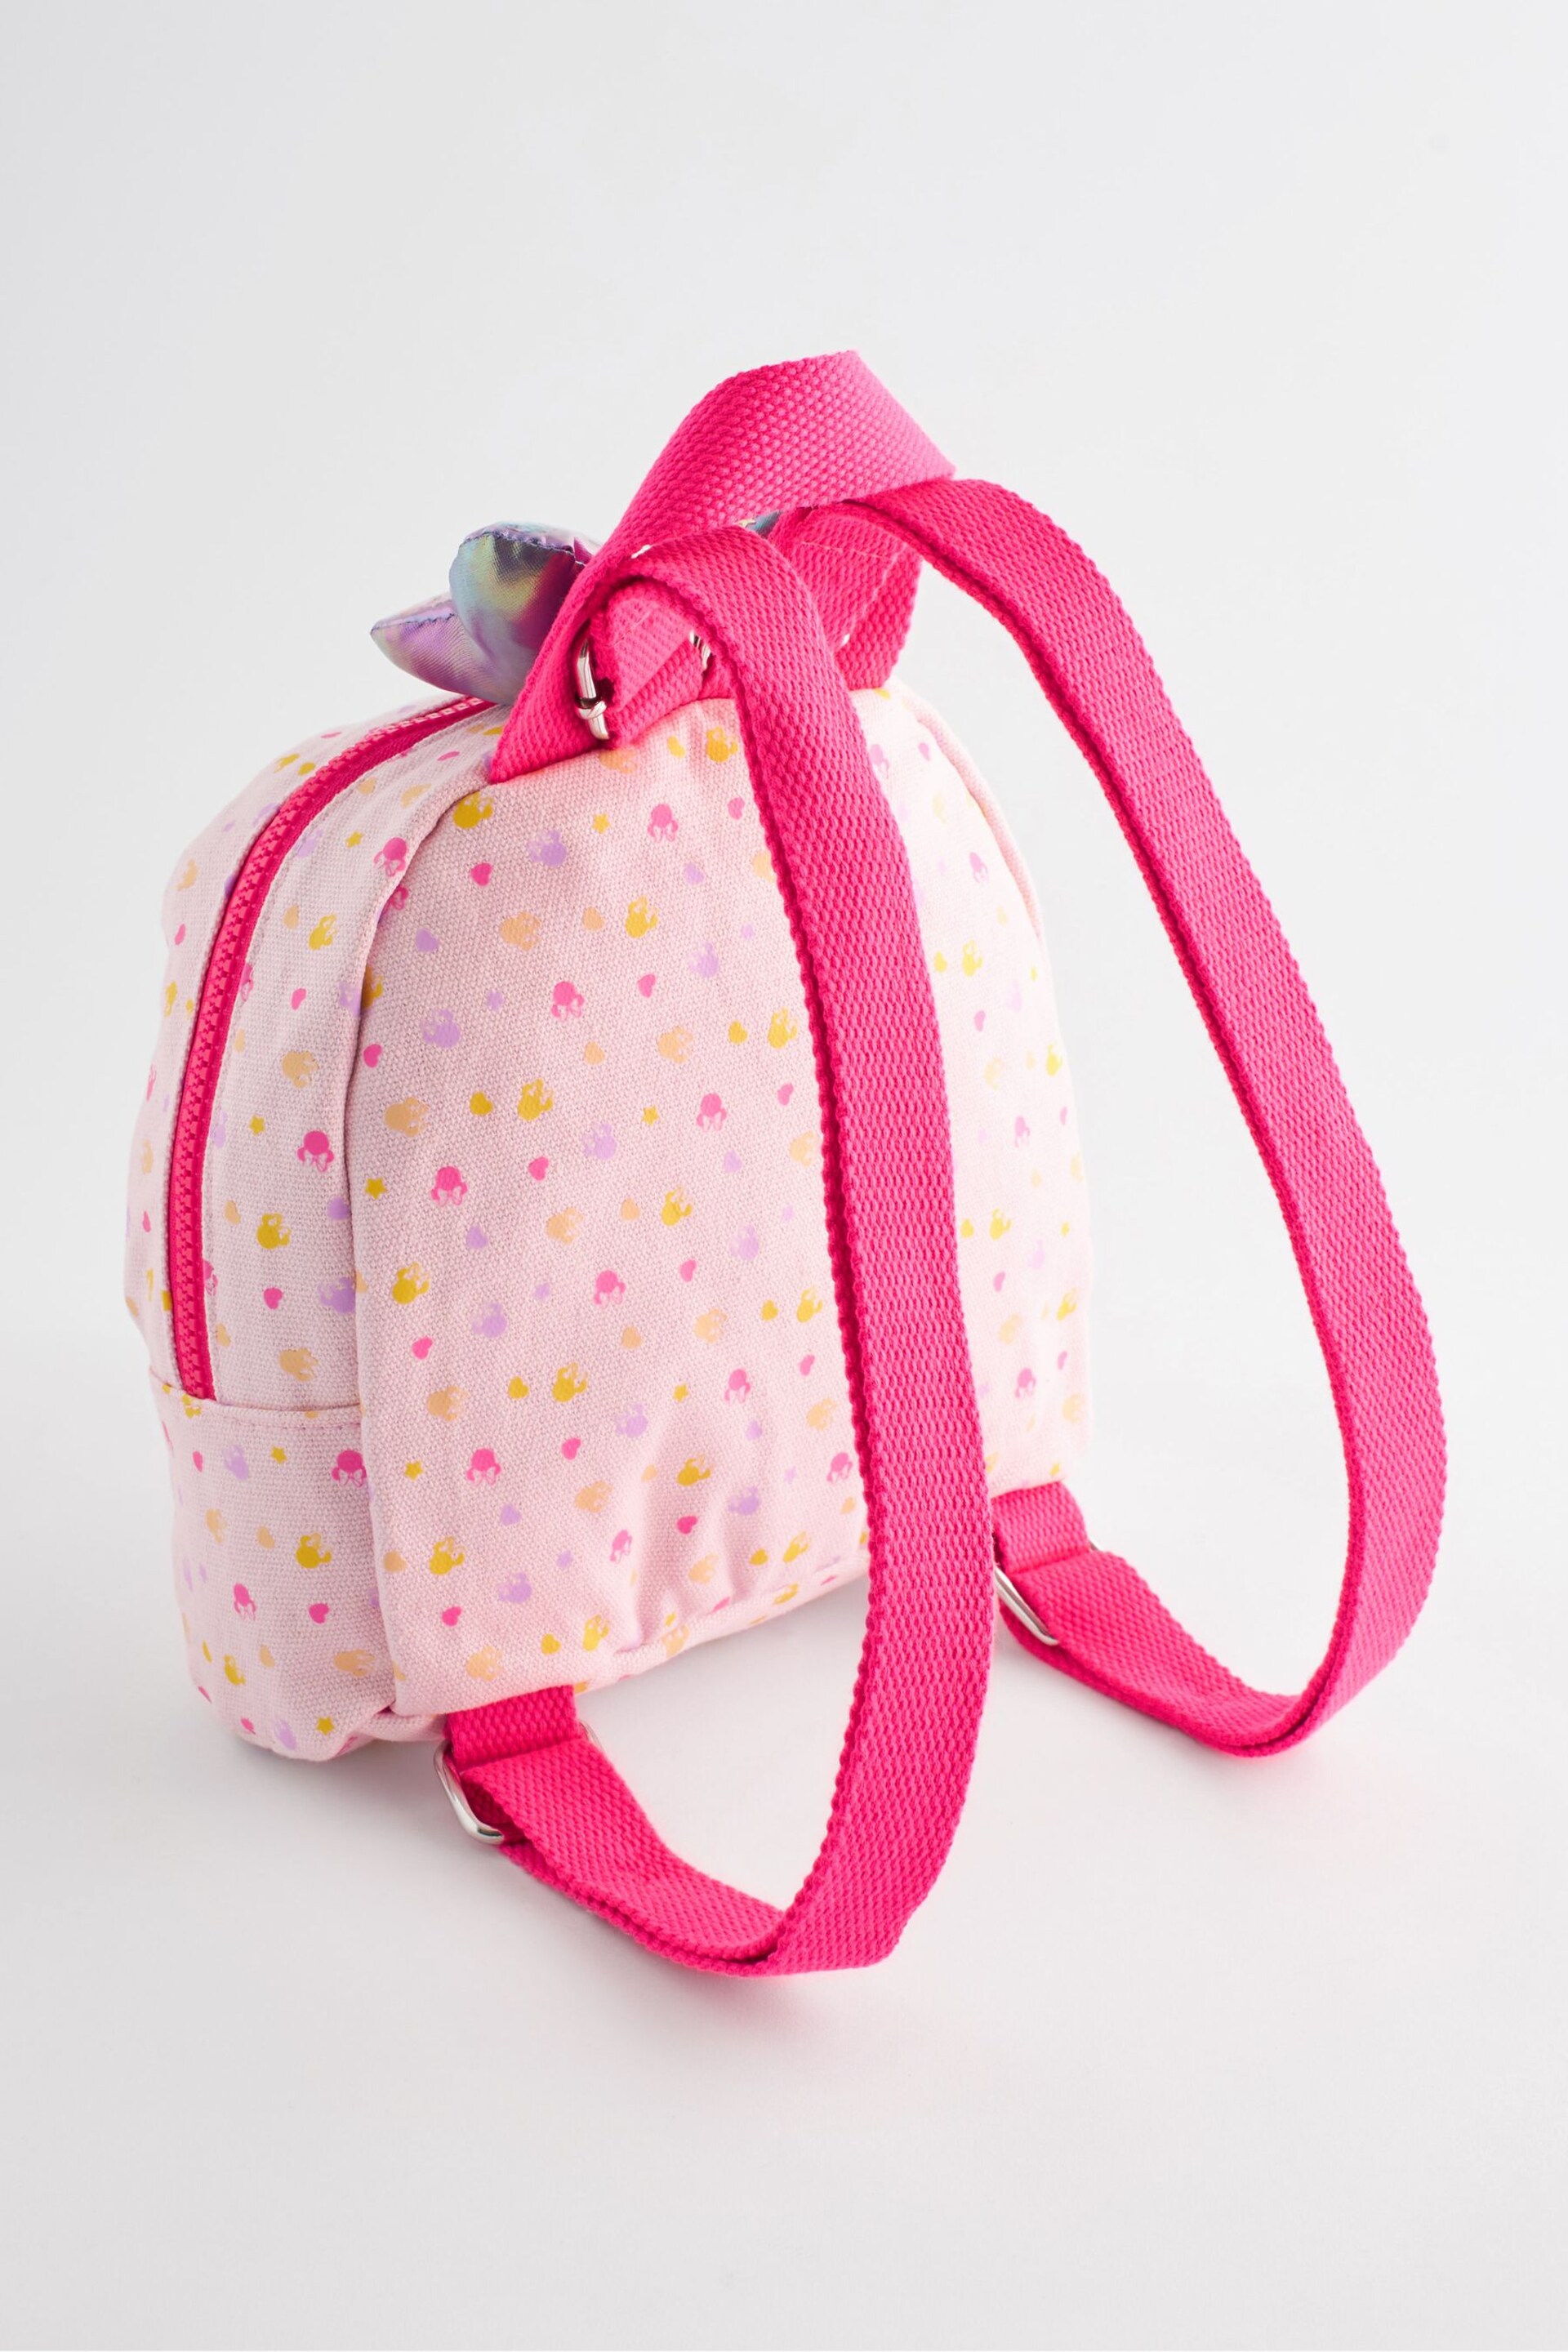 Pink Minnie Mouse Rucksack - Image 2 of 5